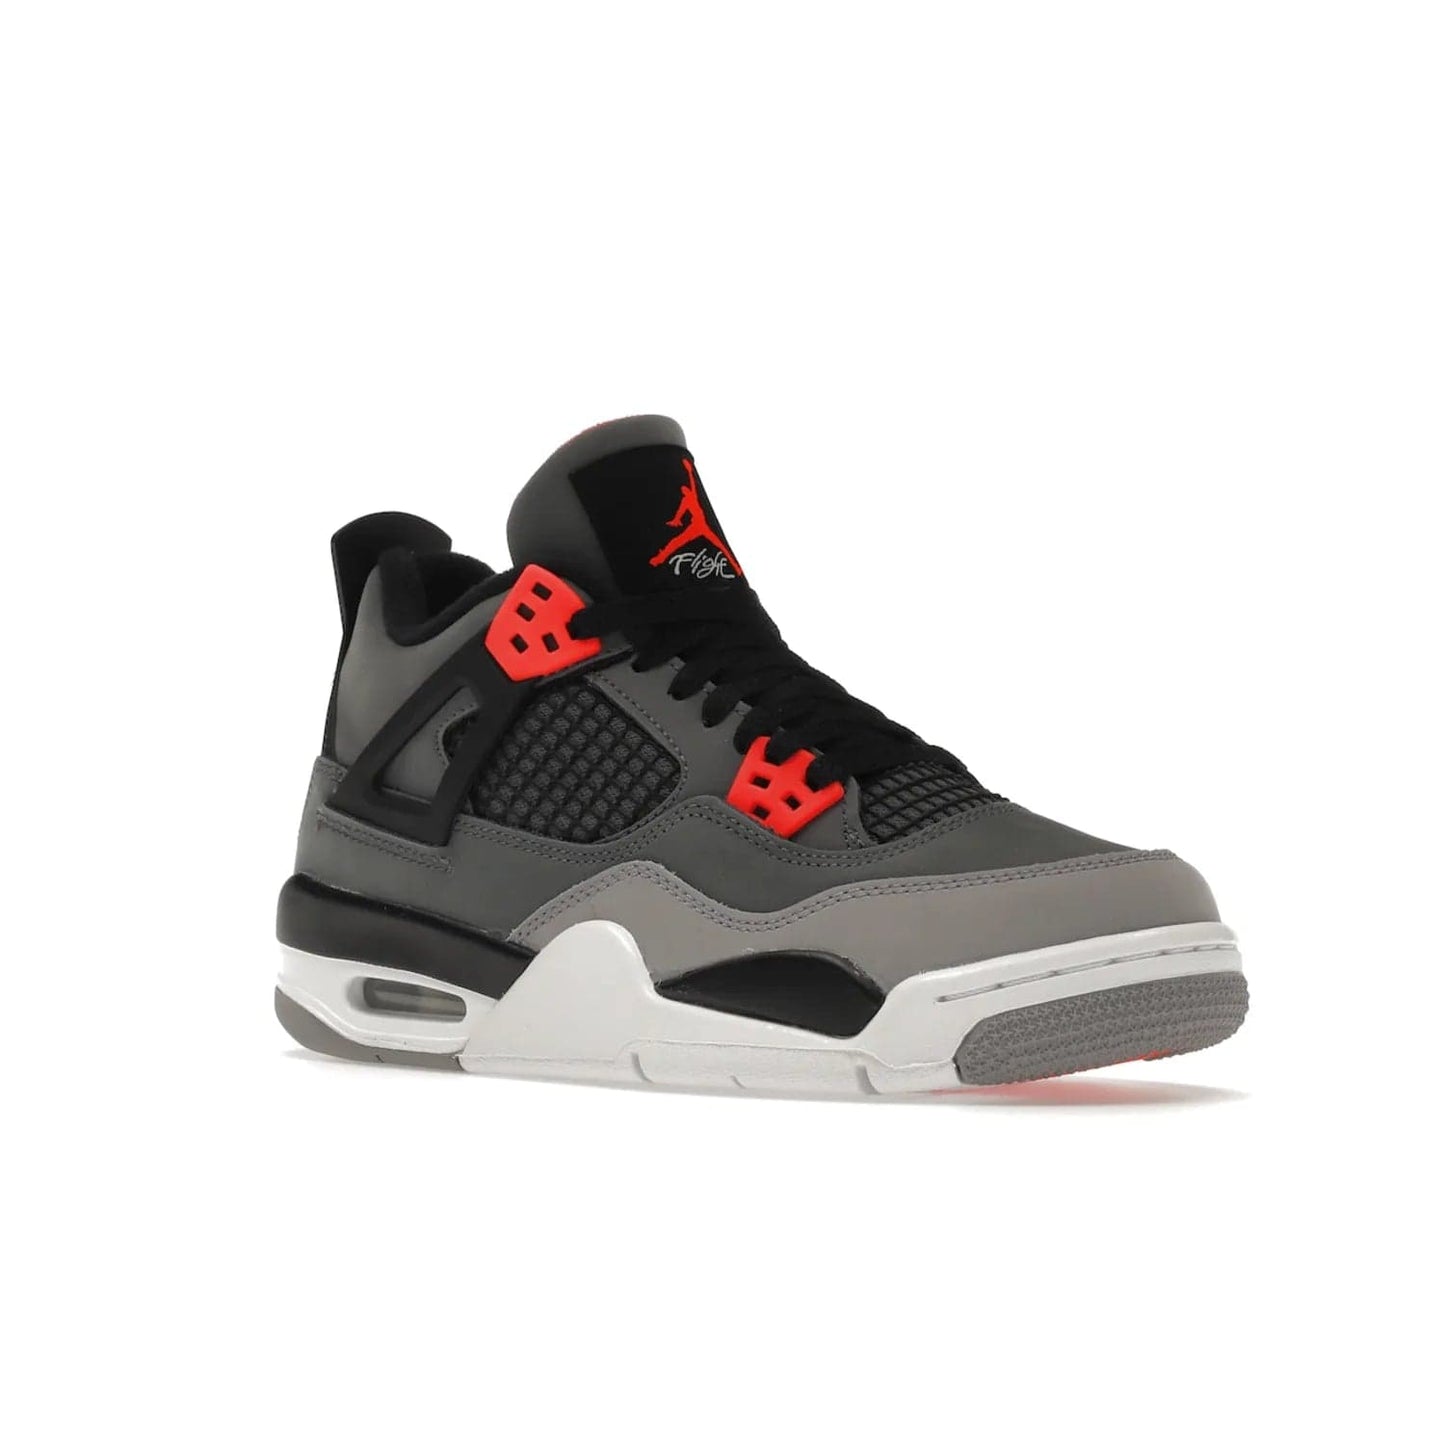 Jordan 4 Retro Infrared (GS) - Image 5 - Only at www.BallersClubKickz.com - Shop the Air Jordan 4 Retro Infrared (GS) for a classic silhouette with subtle yet bold features. Dark grey nubuck upper with lighter forefoot overlay, black accents, Infrared molded eyelets & woven tongue tag. Available June 2022.